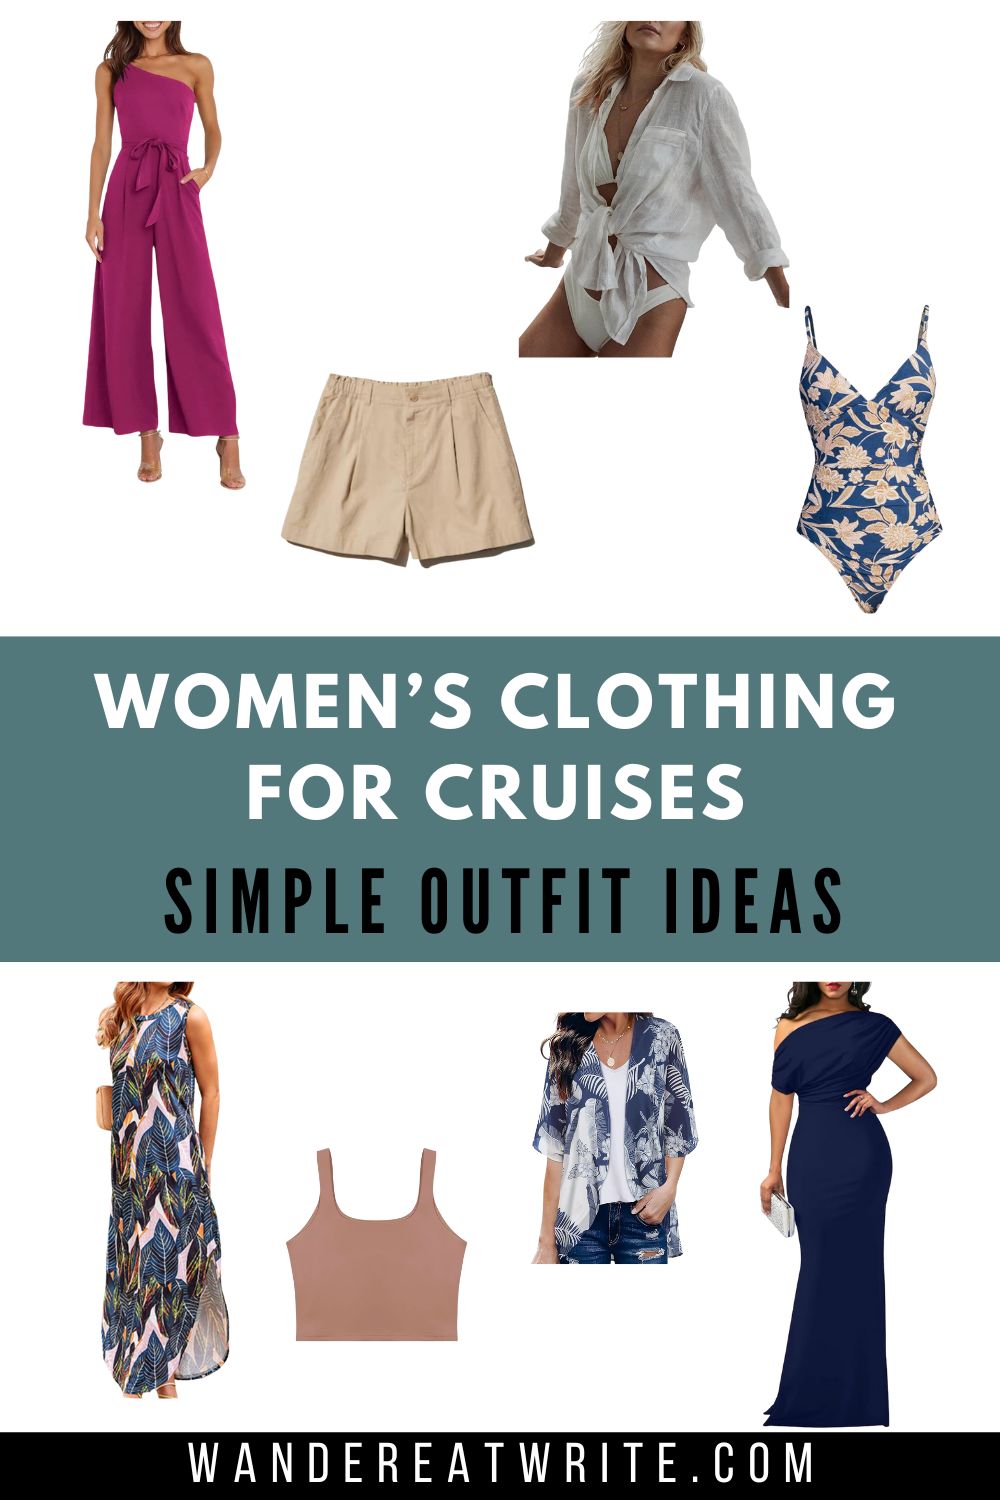 Pin title: Women's Clothing for Cruises: Simple Outfit Ideas. Top photos: pink one-shoulder dressy jumpsuit with waist tie, beige shorts, white button down, navy one-piece bathing suit with beige floral pattern. Bottom photos: sleeveless maxi summer dress with blue feathered pattern, light pink cropped tank top, navy kimono cardigan with white feathered pattern, navy floor-length gown